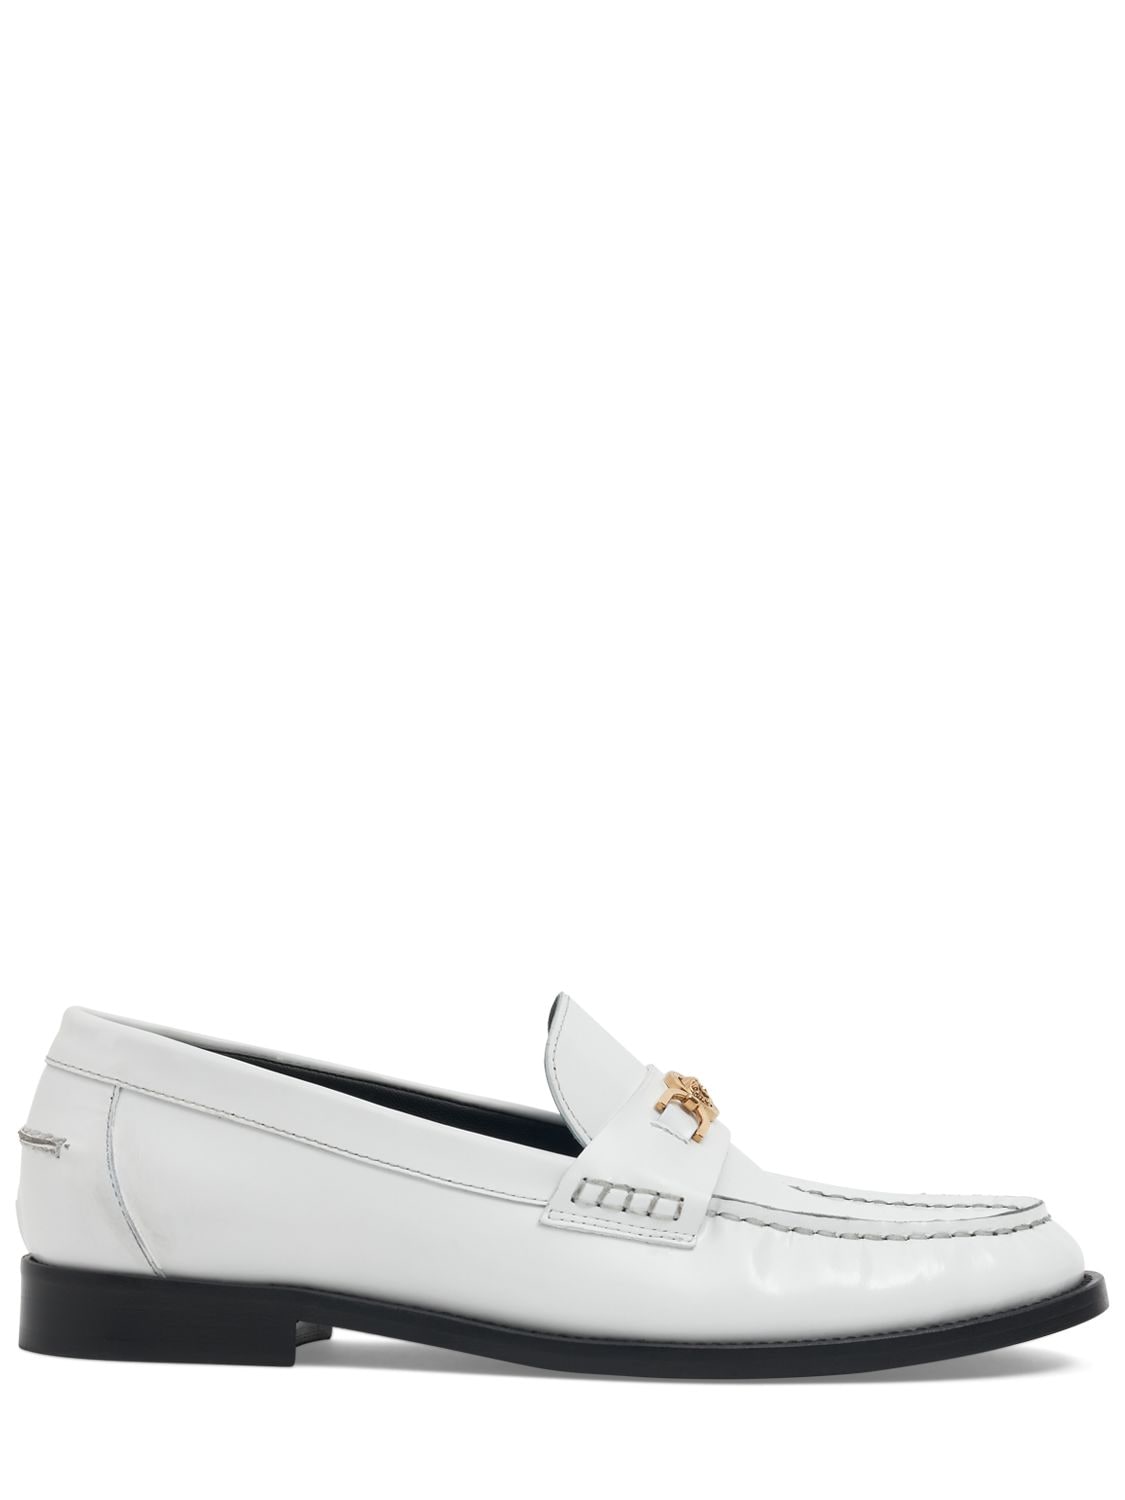 Versace 20mm Leather Loafers In White